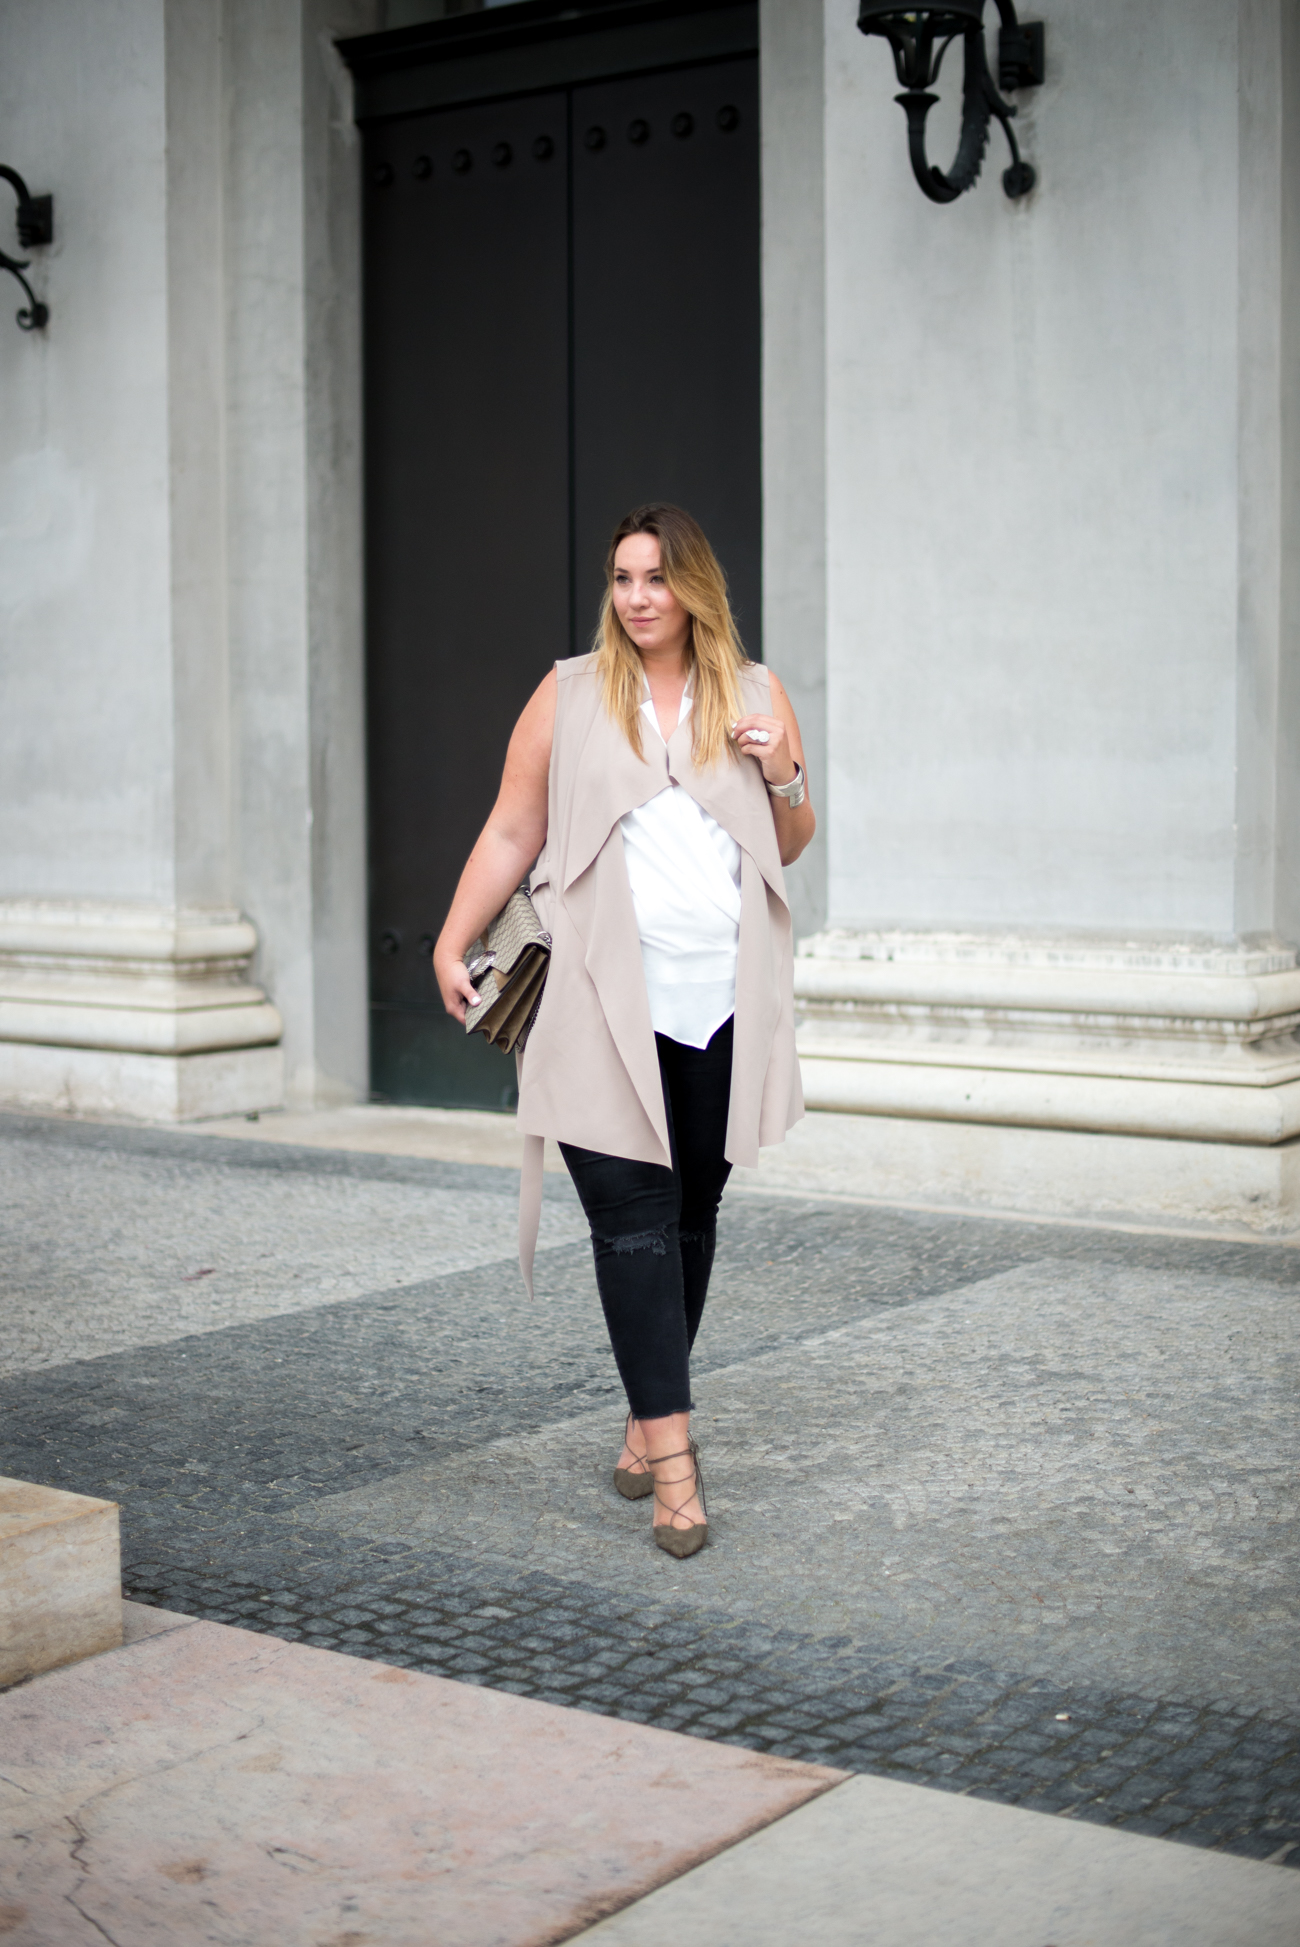 The Skinny and the Curvy One_Fashion_blogger_Plussize_Soulfully_Marina Rinaldi_Asos_Asos Curve_Plus Size Blogger_Plus Size Münche_Fashionblogger München (8 von 10)